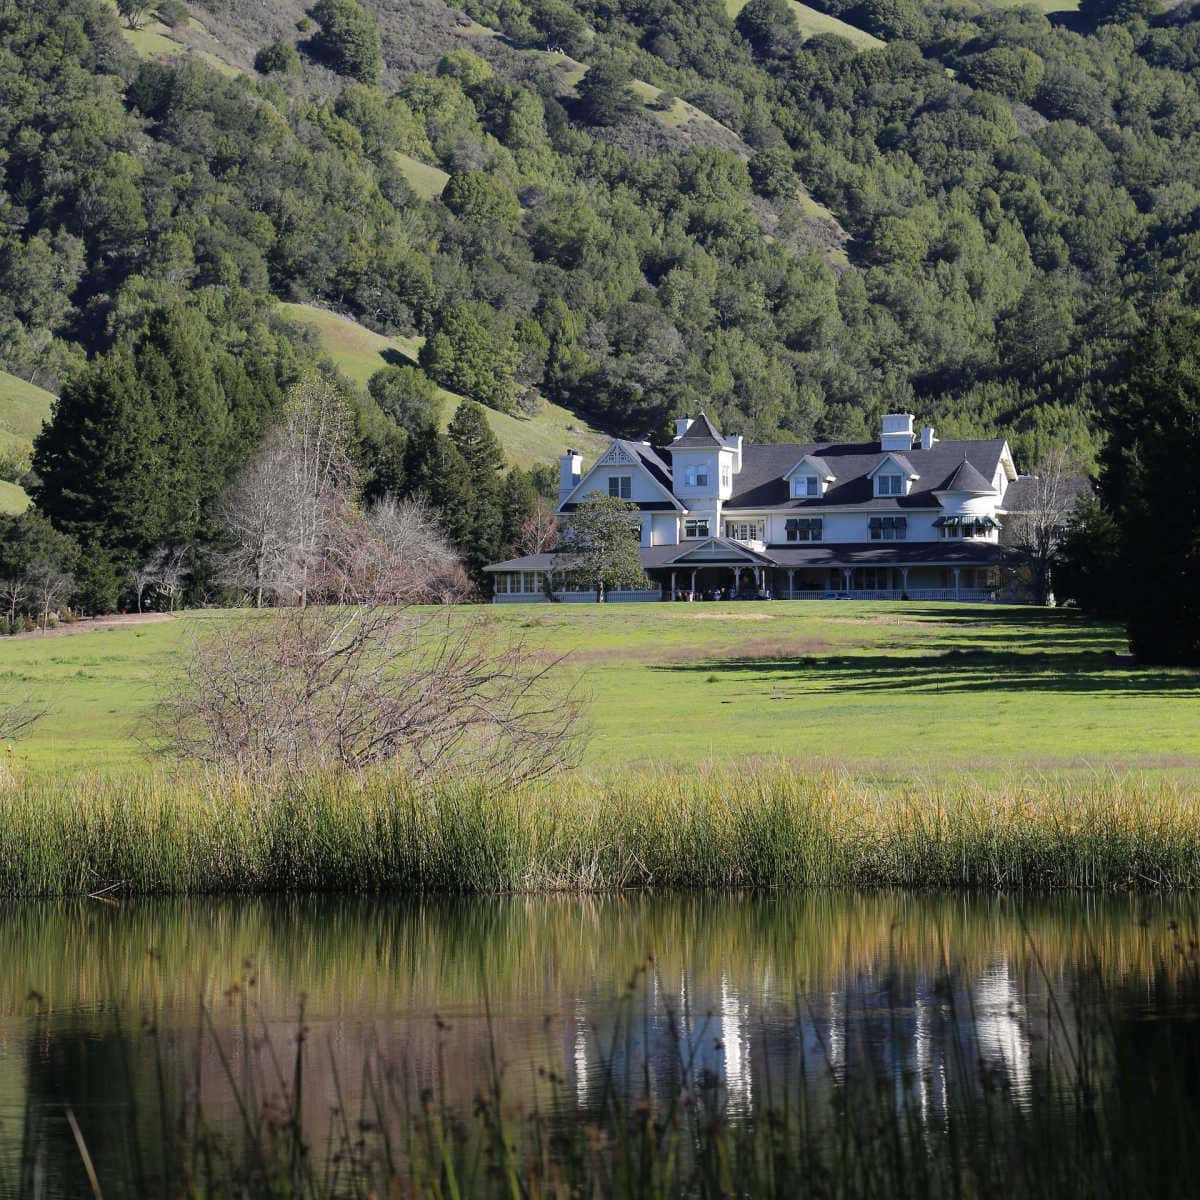 Large white house in the background by rolling green hills with a lake in the front with a reflection of the house.